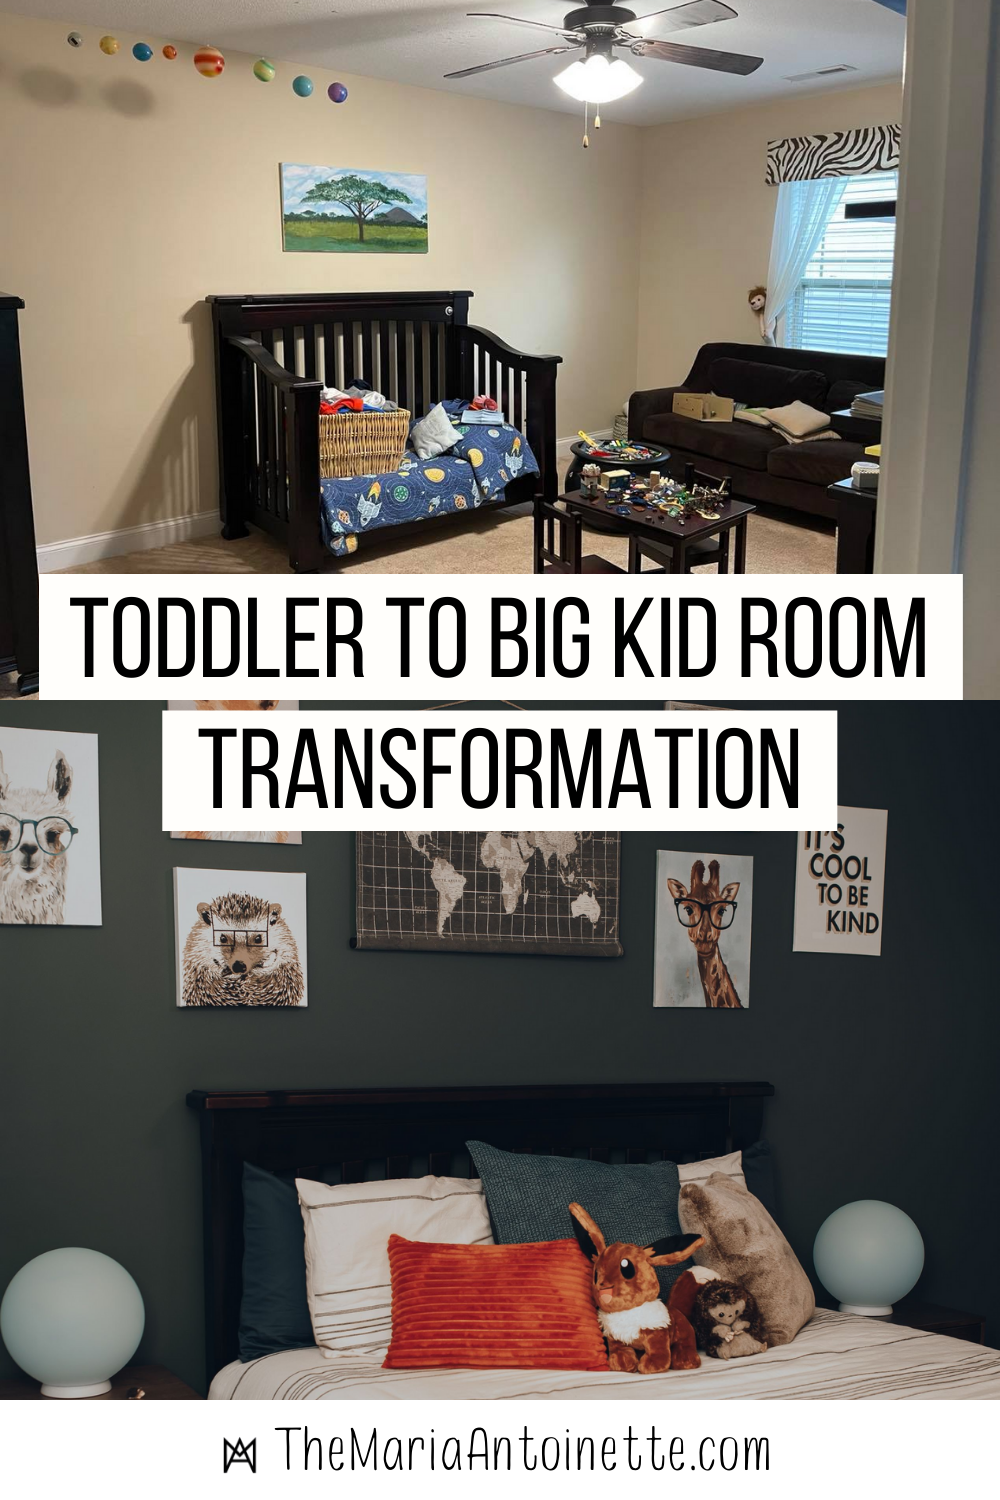 https://themariaantoinette.com/wp-content/uploads/2021/05/toddler-to-big-kid-pin-1.png